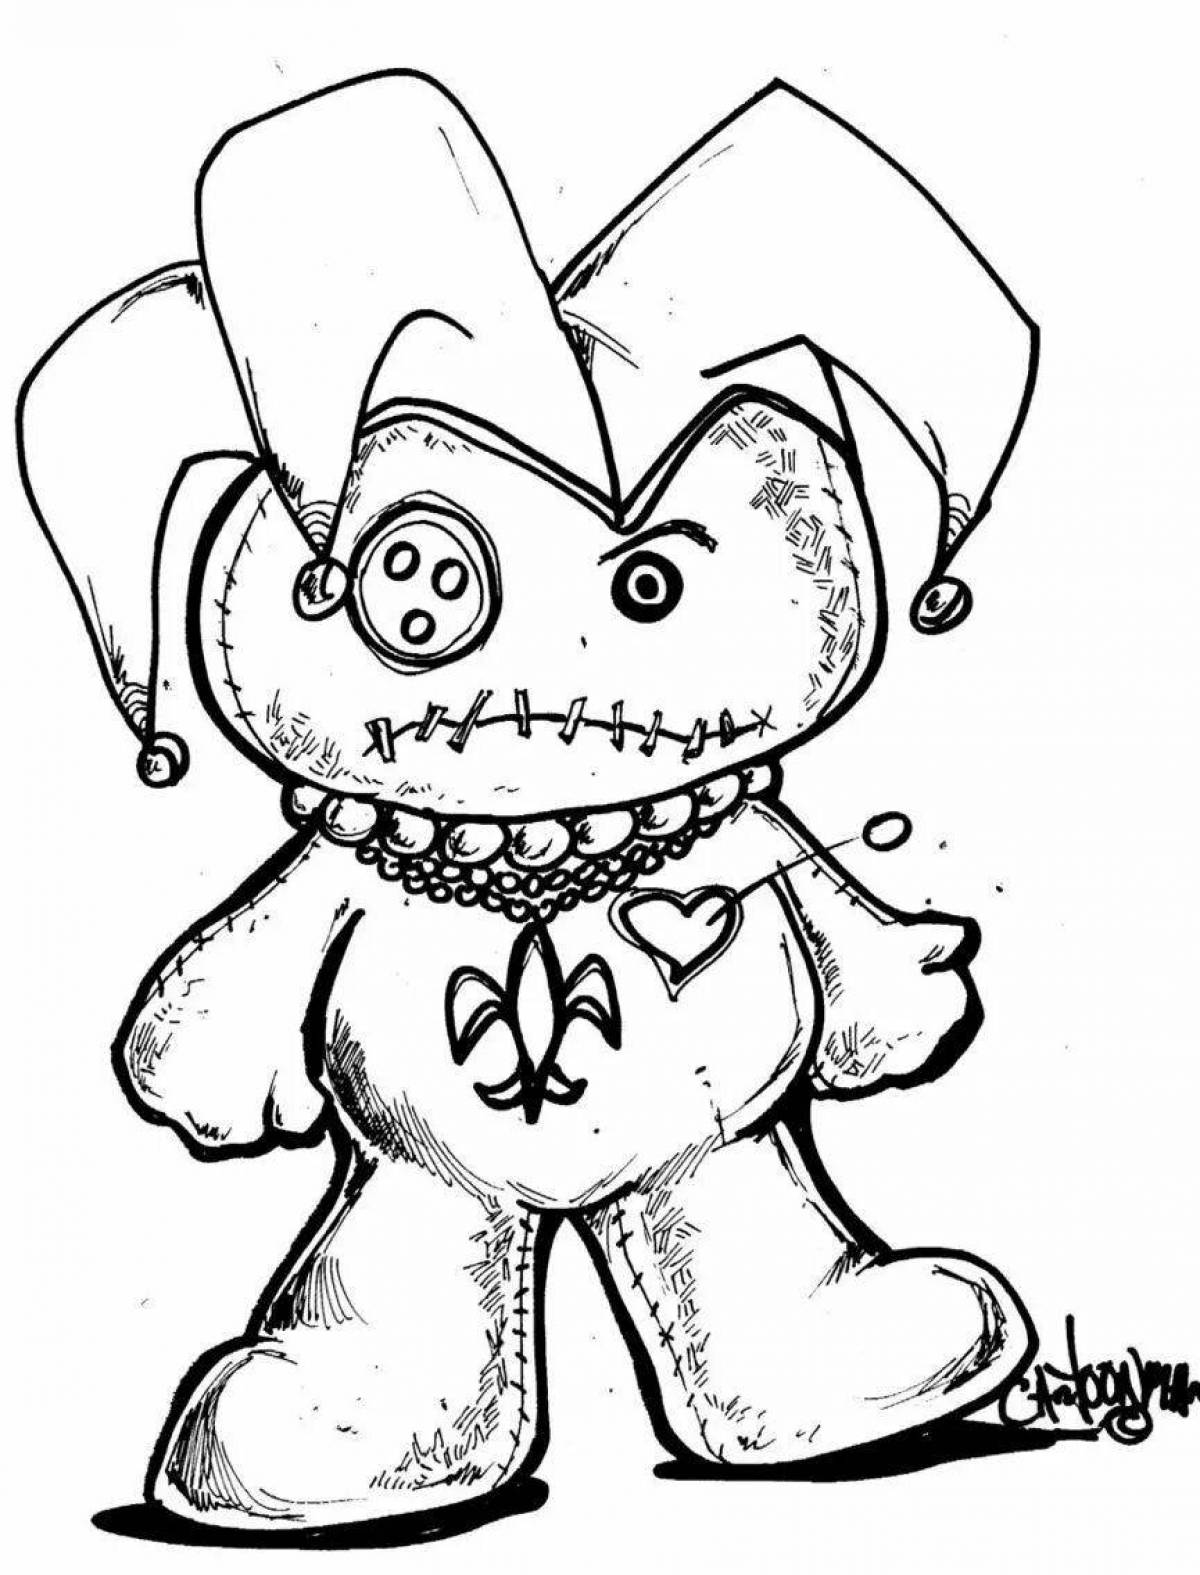 Coloring page sexy voodoo doll